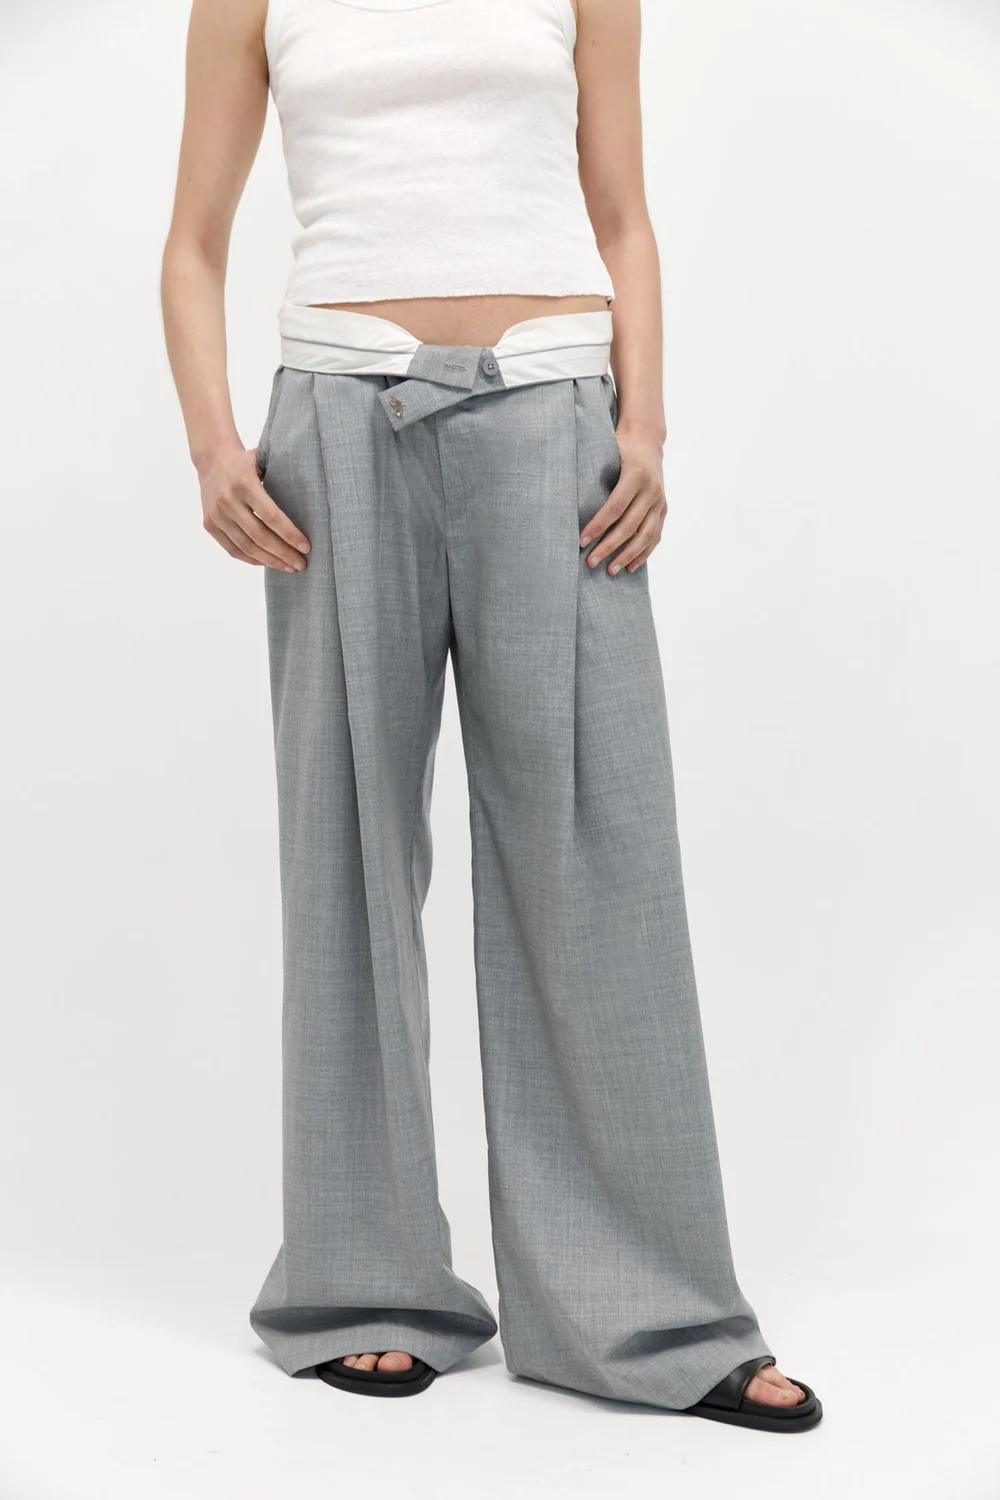 Product Image for Overlap Waist Trousers, Grey